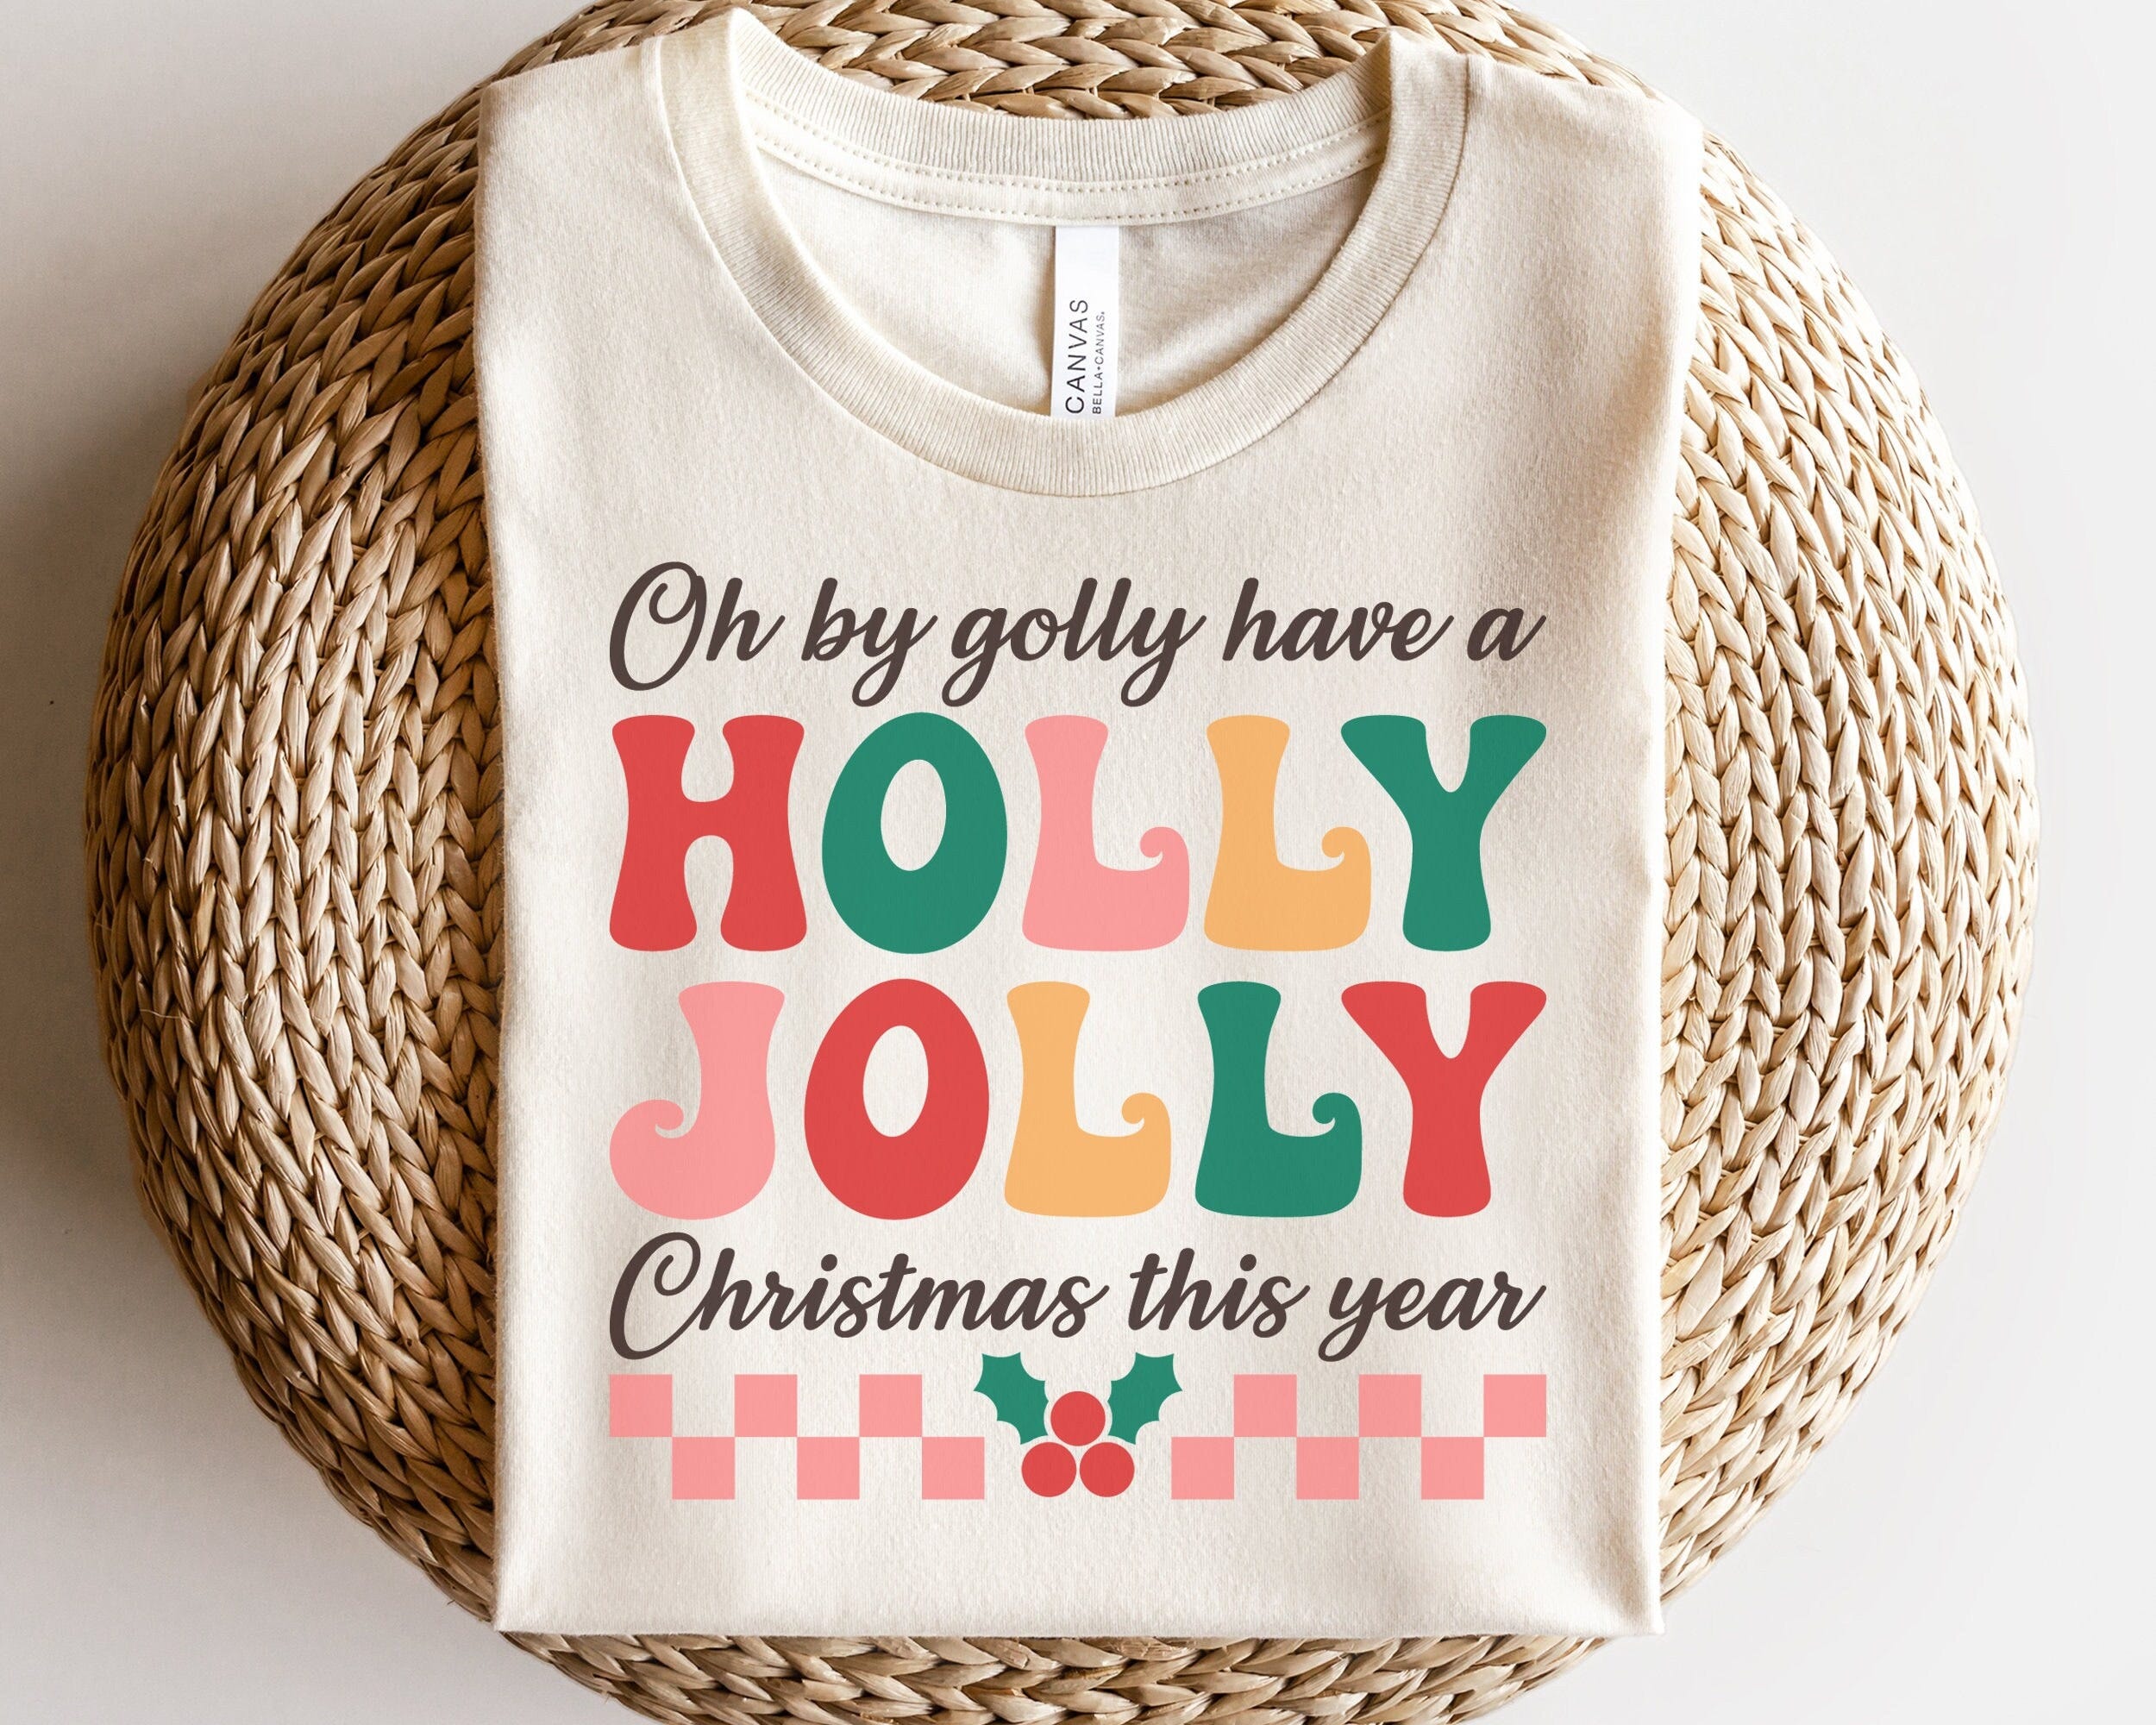 Oh by golly have a Christmas this year holly jolly SVG, Christmas SVG, Groovy Holiday Gift, Retro Christmas Shirt, Svg Files For Cricut